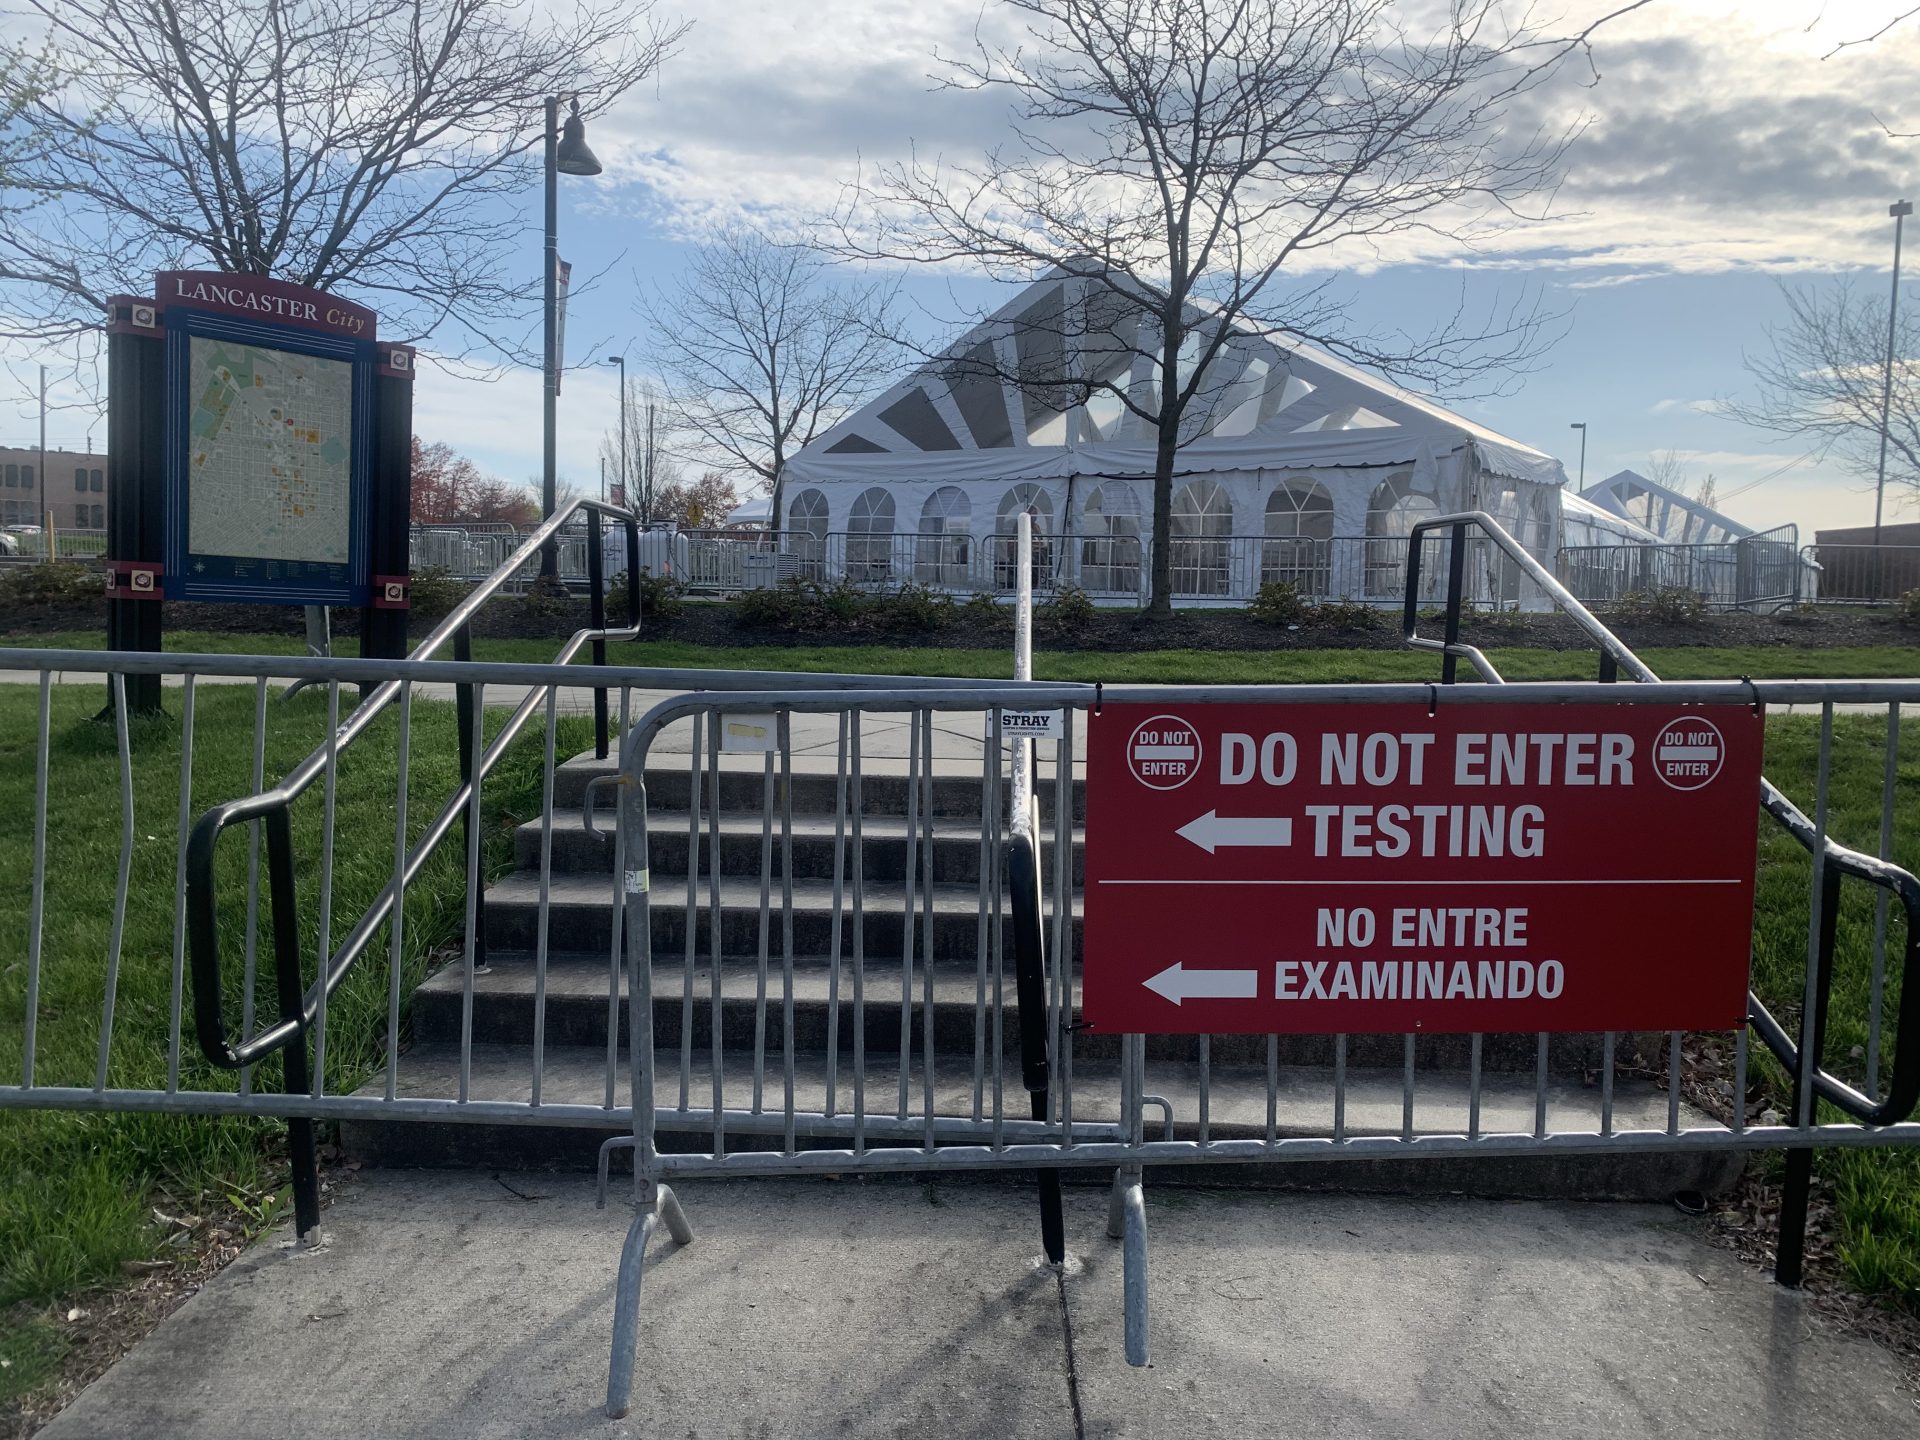 A sign blocks access to a portion of the parking lot outside Clipper Magazine Stadium in Lancaster, Pa., on April 7, 2020. A coronavirus testing center will operate out of several tents erected in the stadium parking lot.

Russ Walker / PA Post